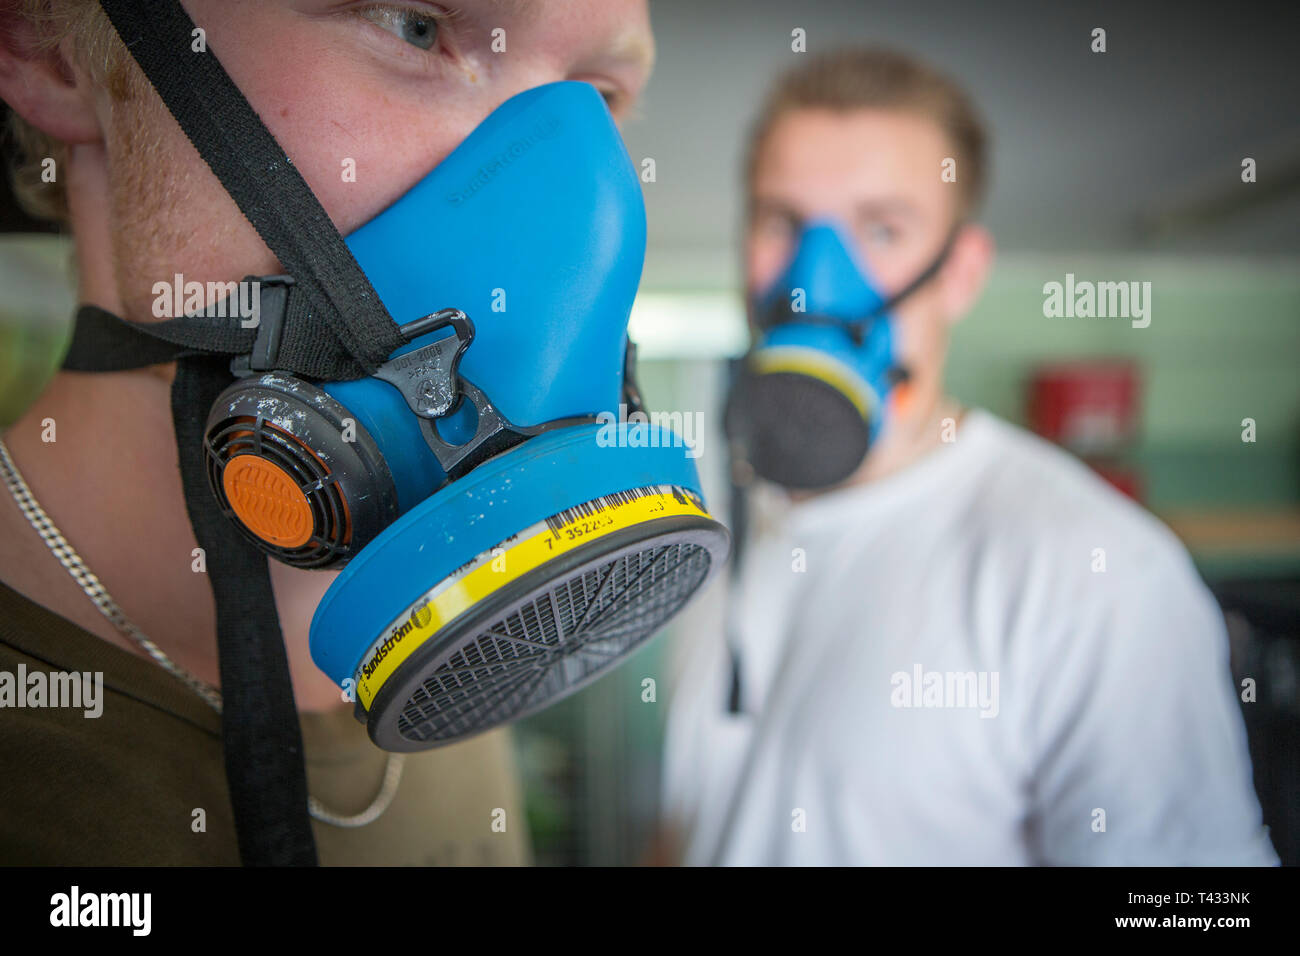 Graffiti painter with protective mask, Upplands Väsby, Sweden. Stock Photo